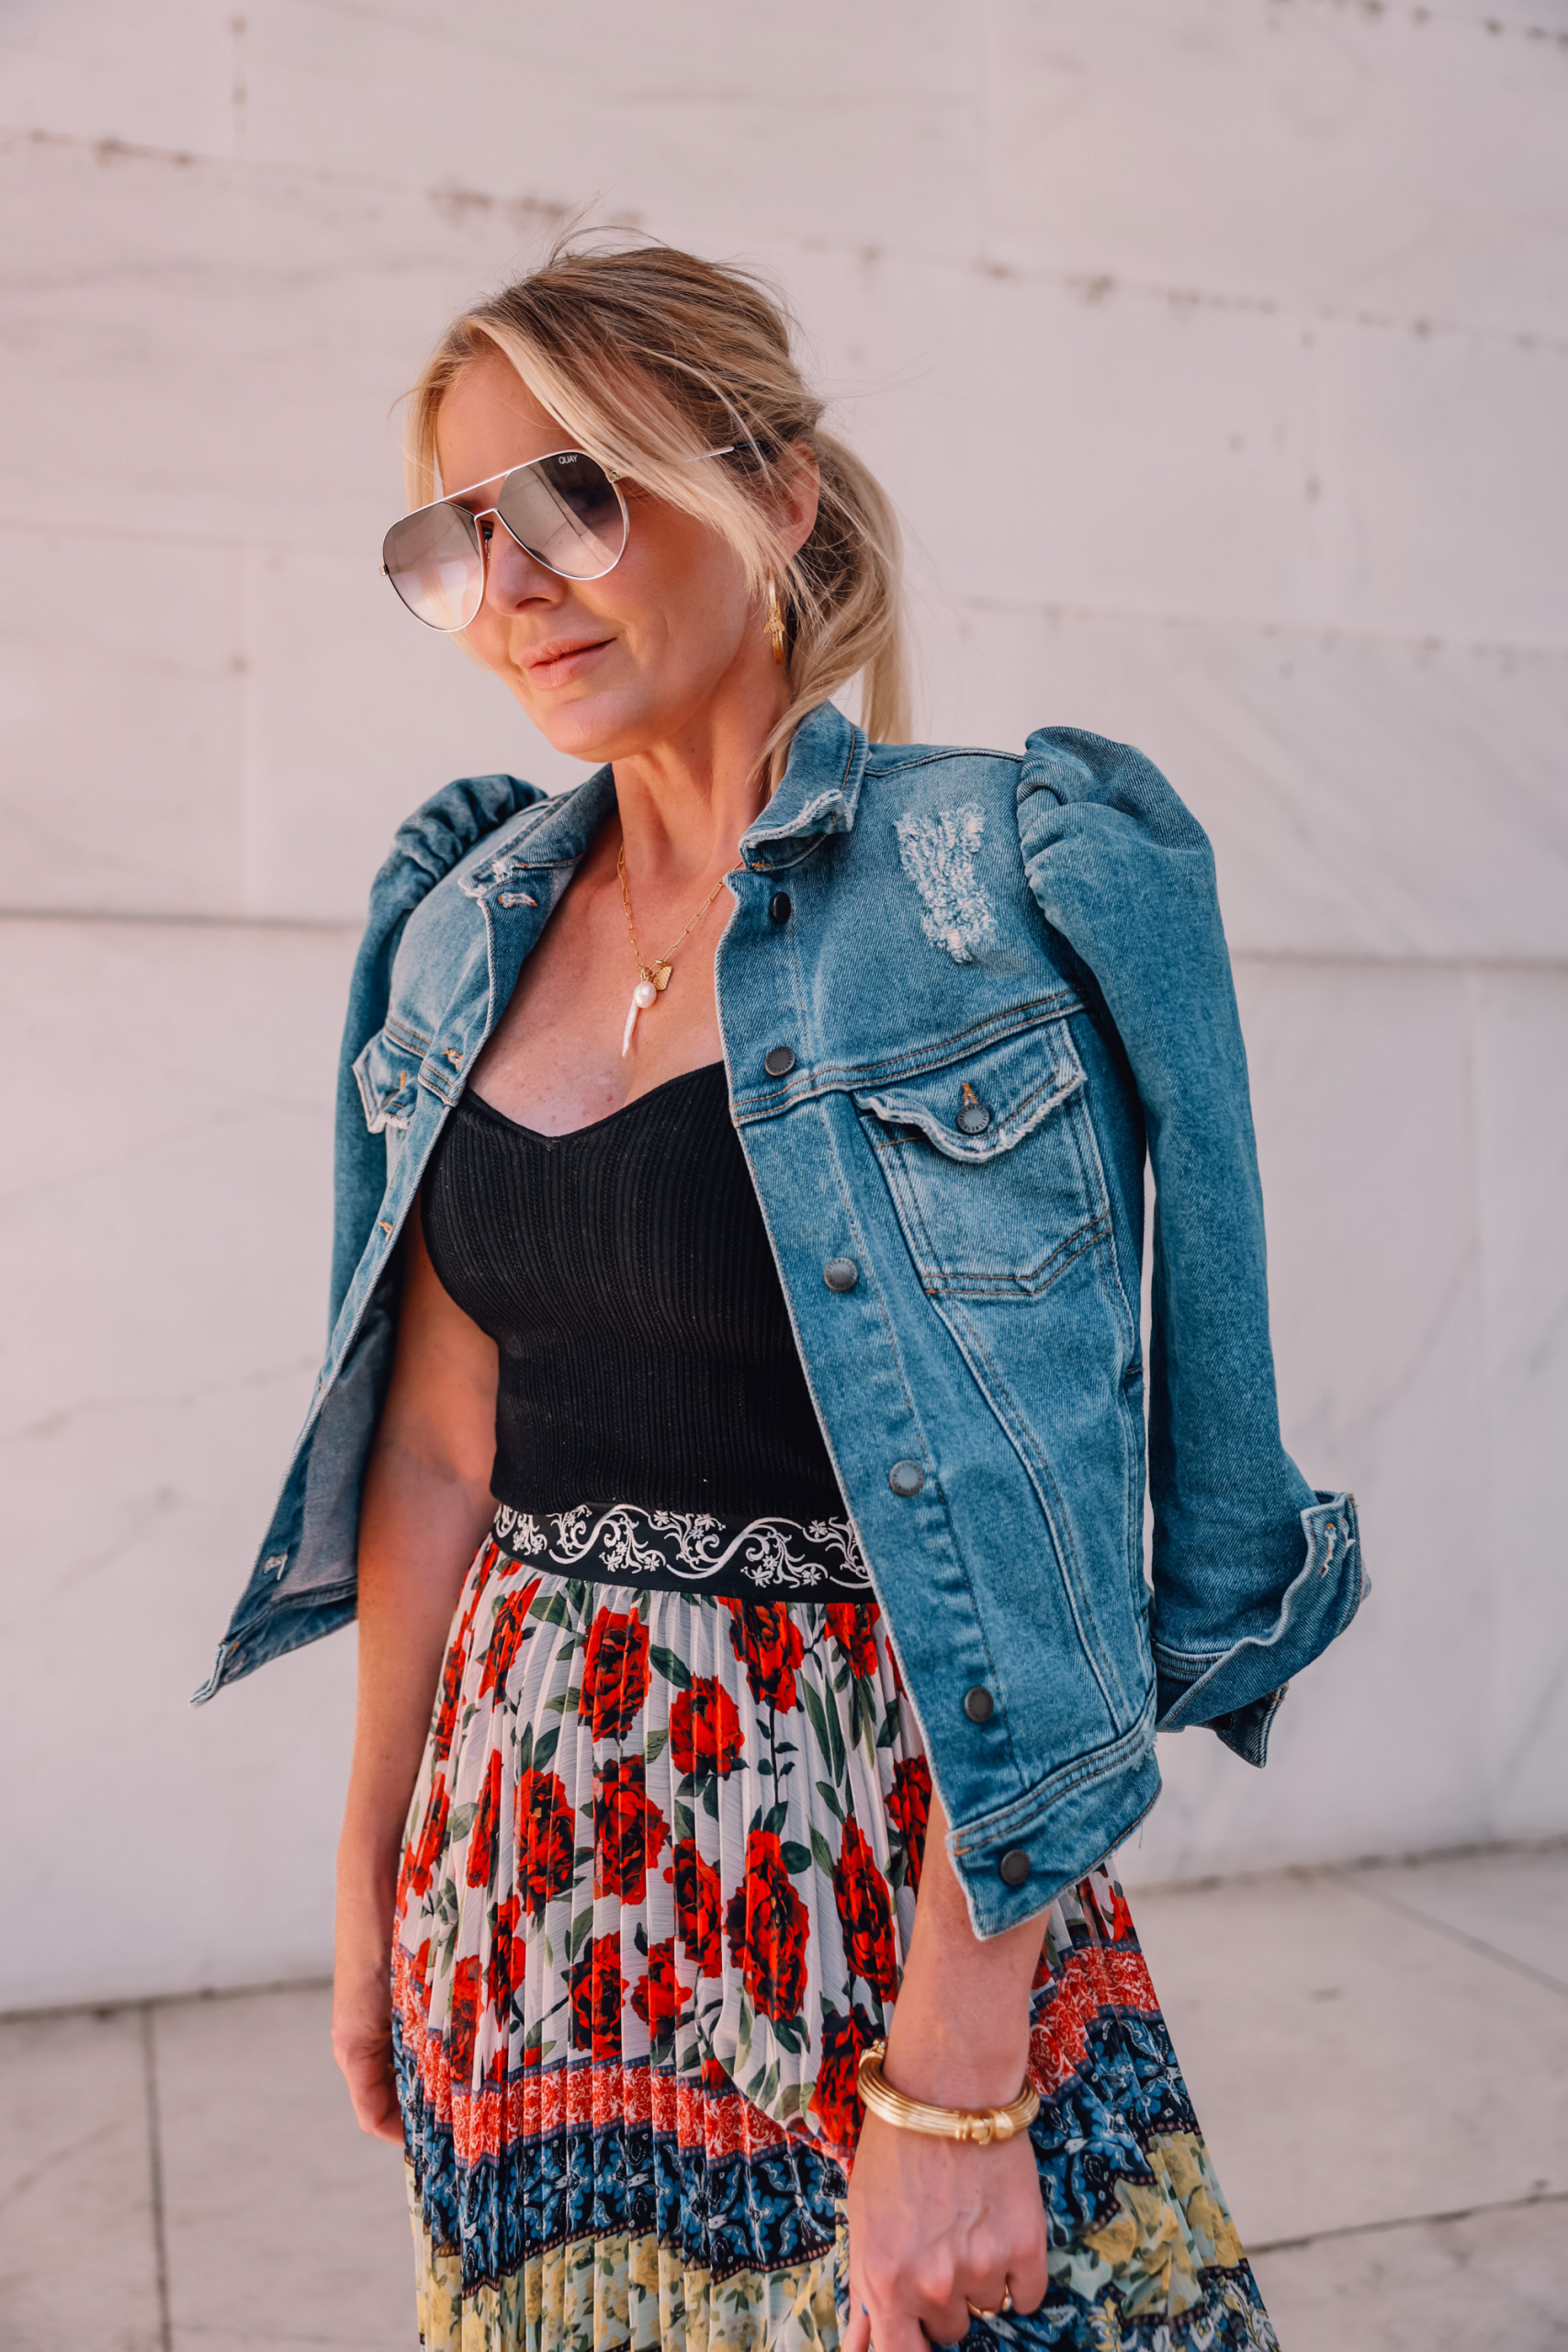 Slim Fit Denim Jacket With A Maxi Skirt